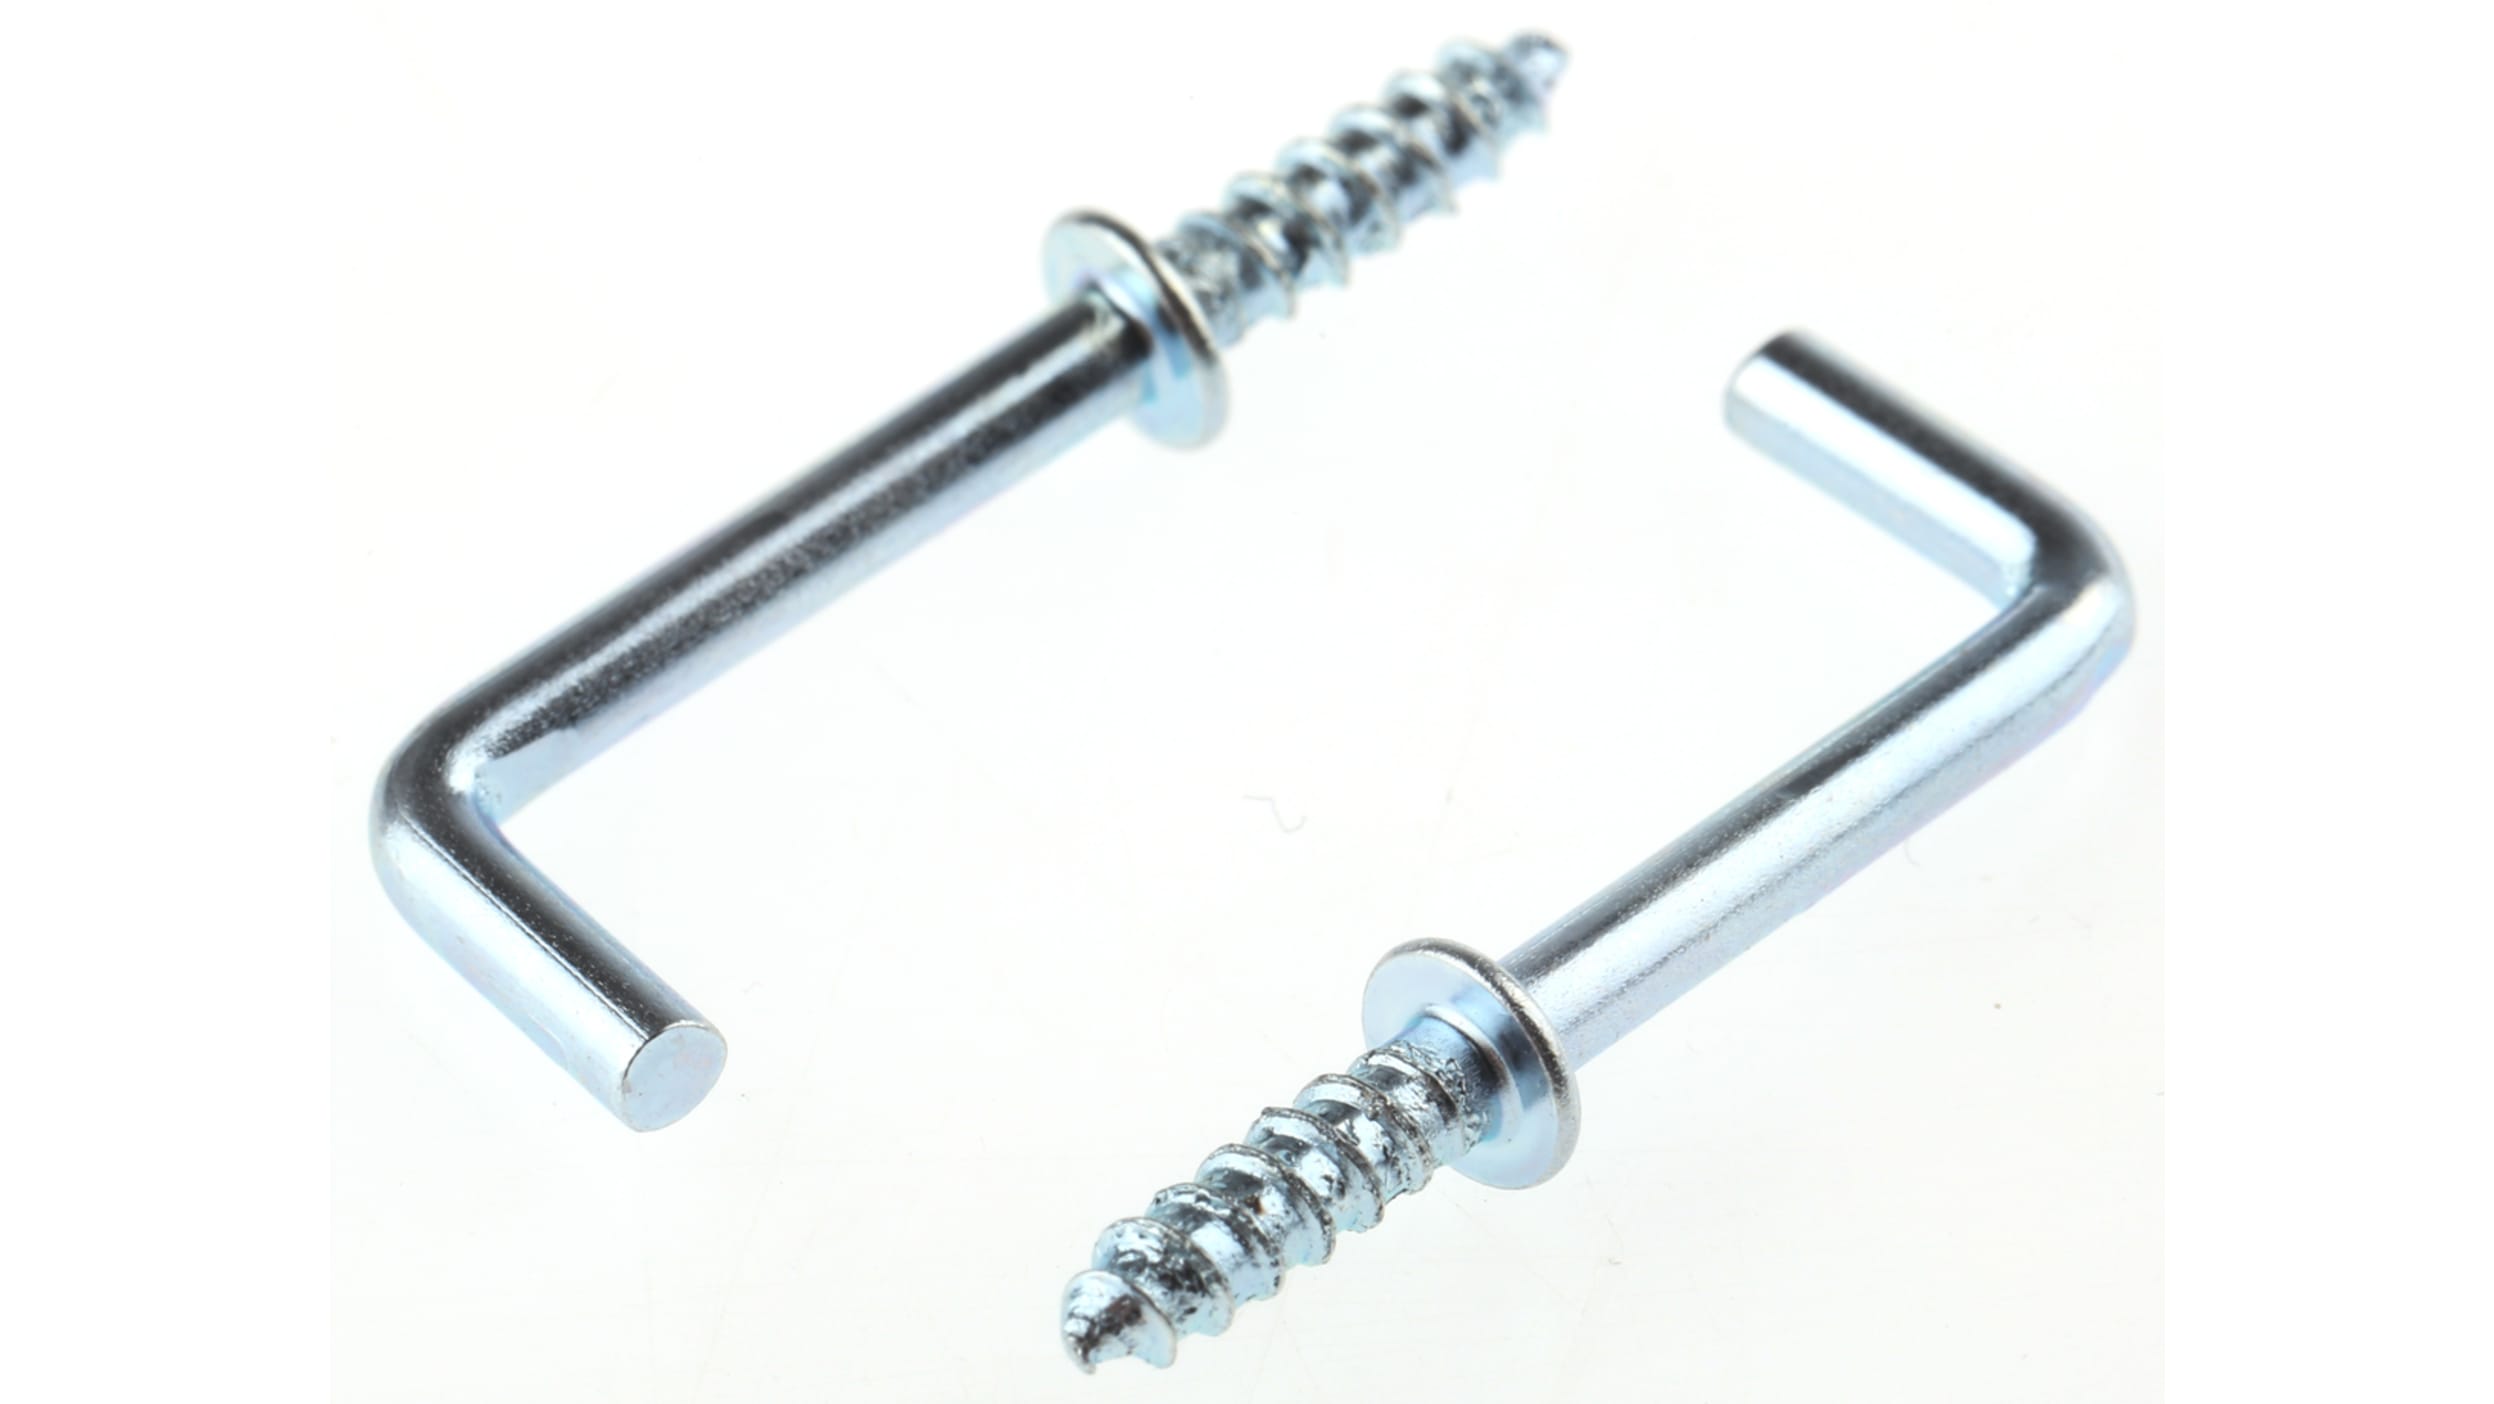 Hook Screw Photos and Images